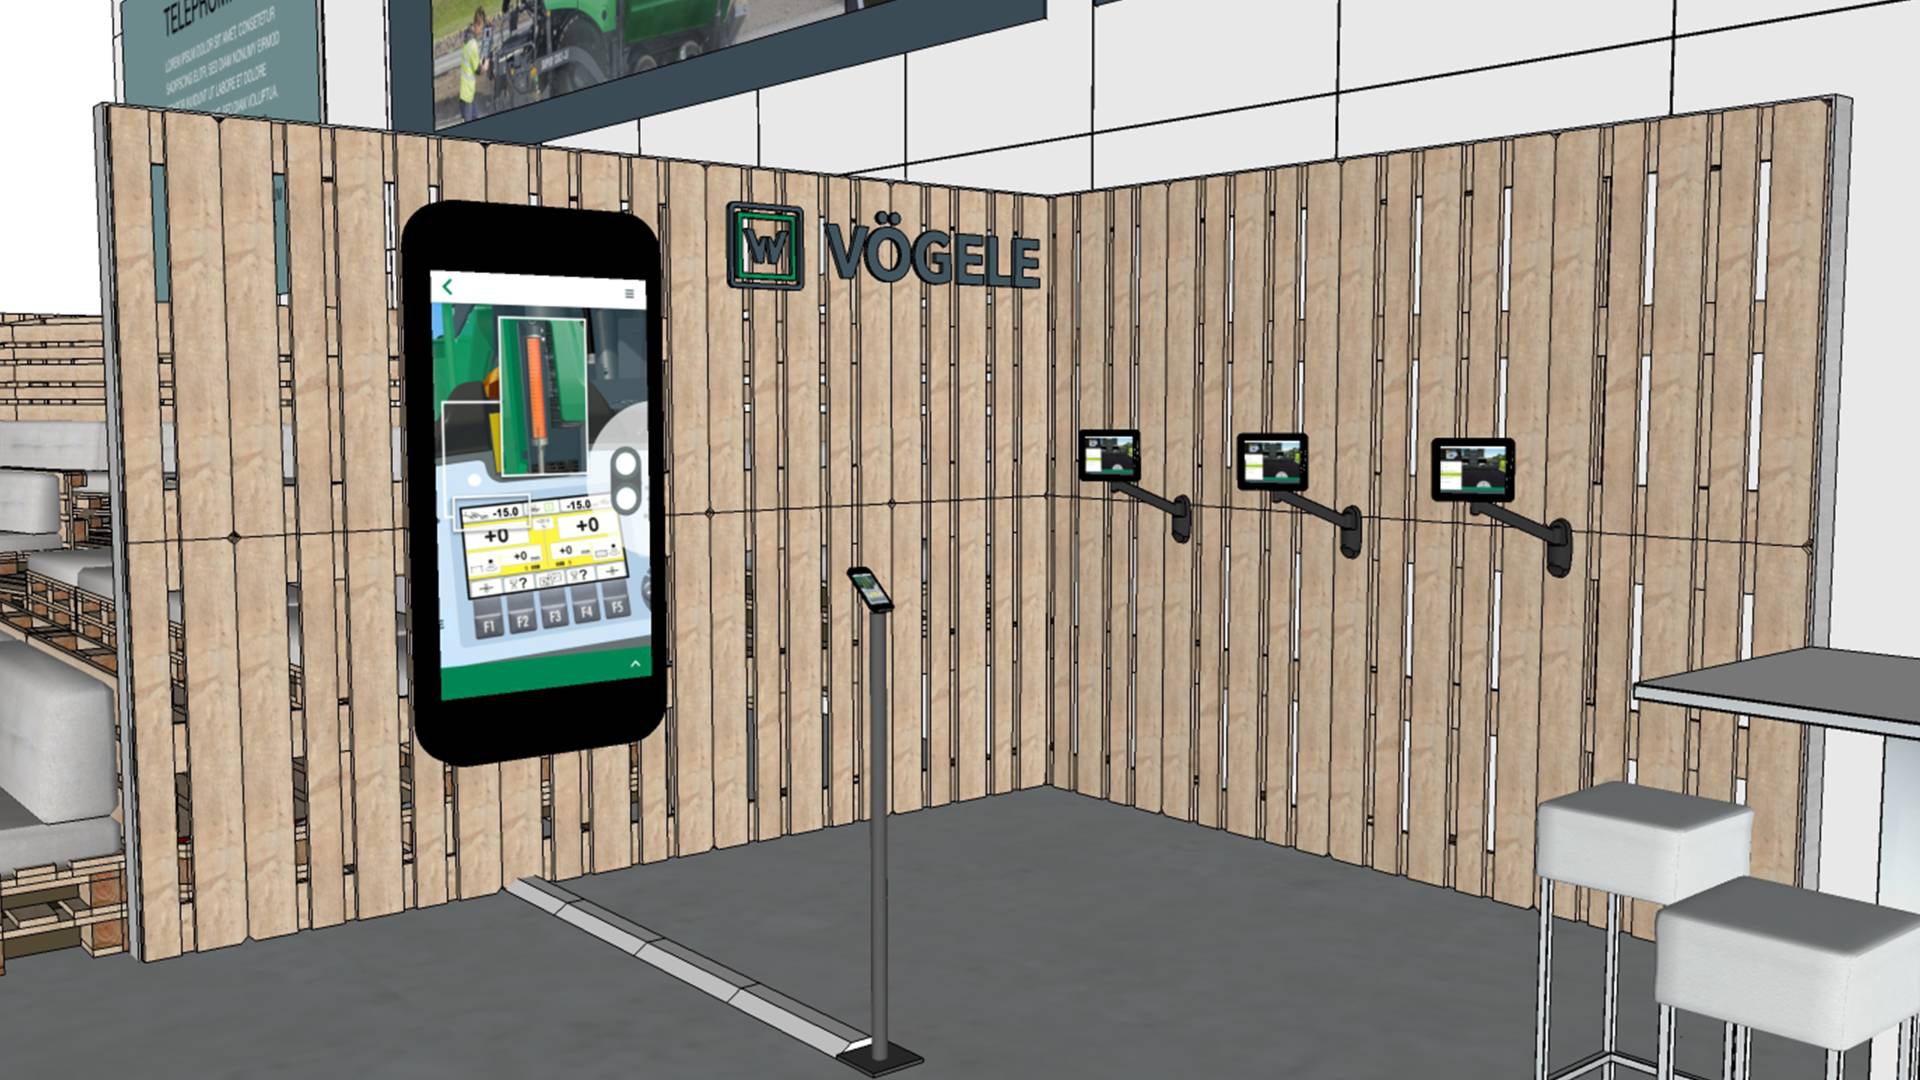 Drawing of a smartphone with the Vögele app